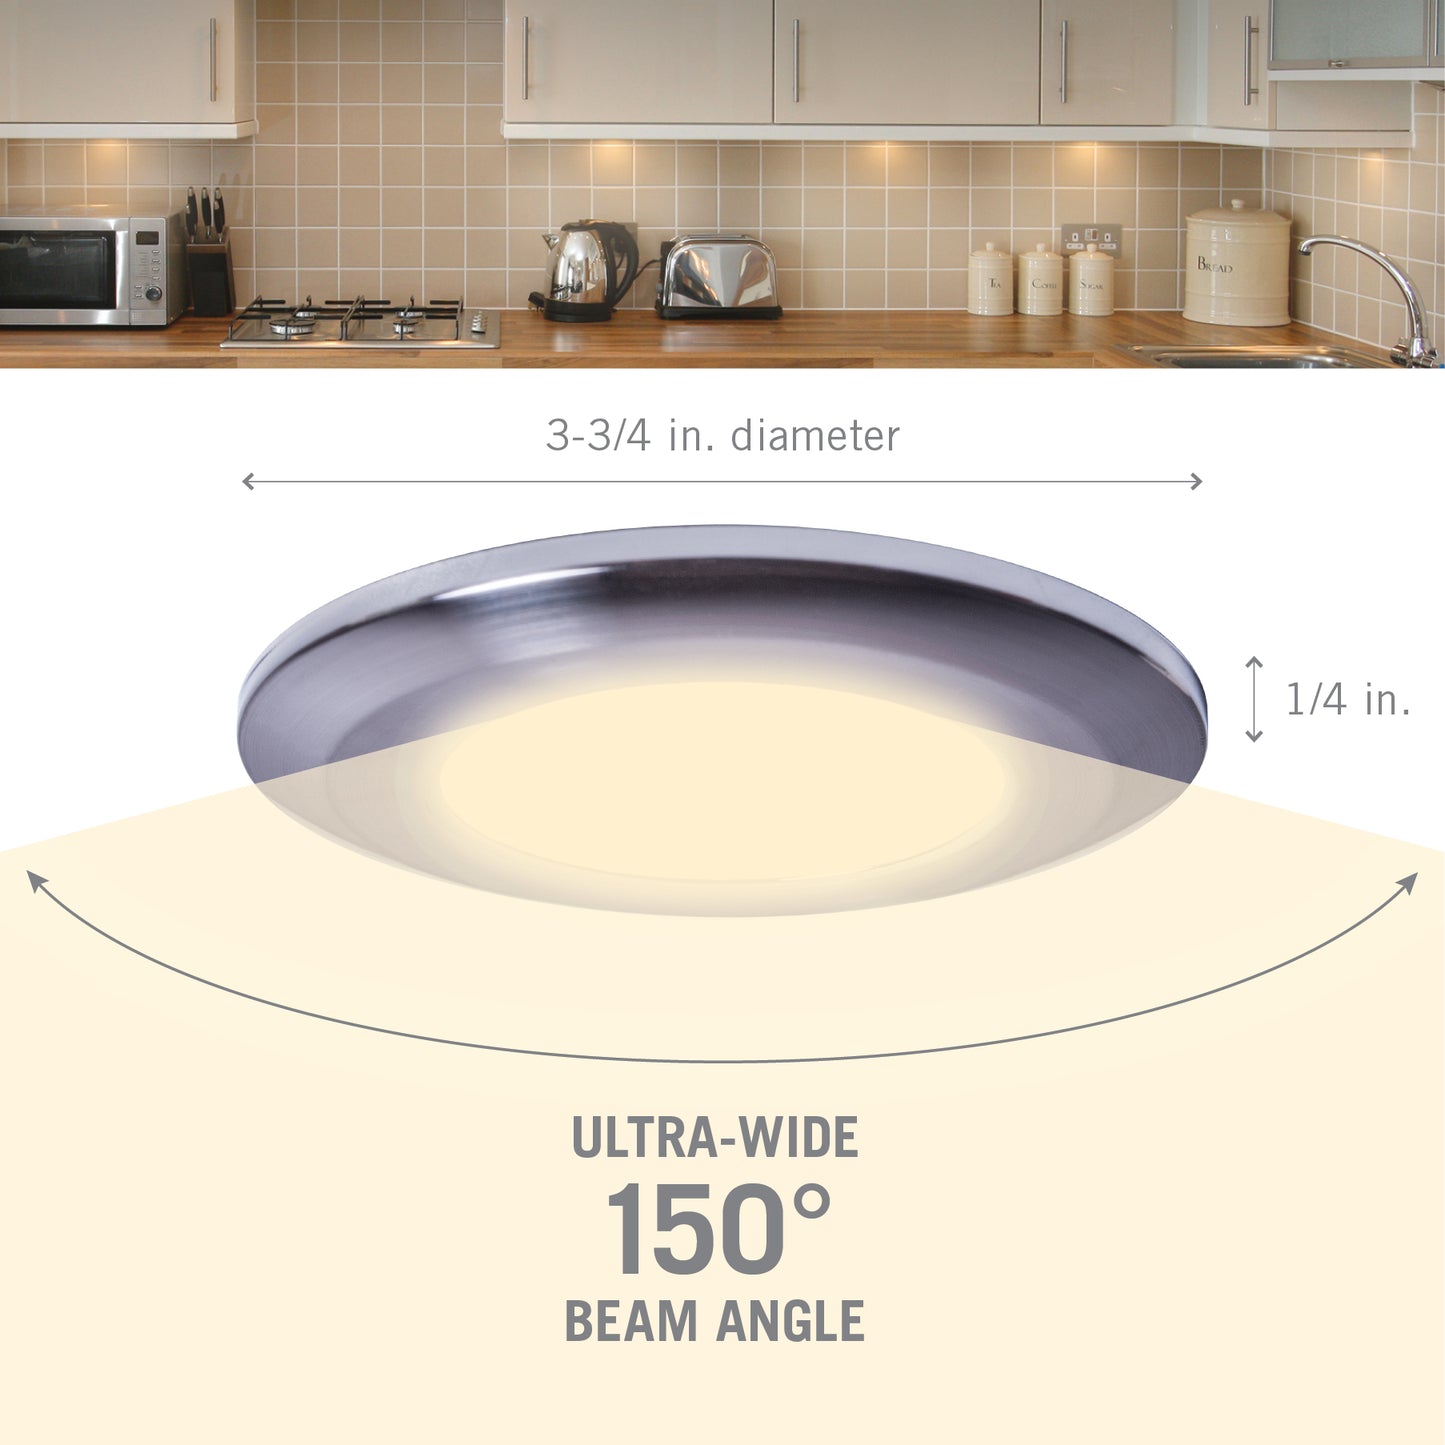 Wafer Thin Dimmable Under Cabinet LED Puck Light